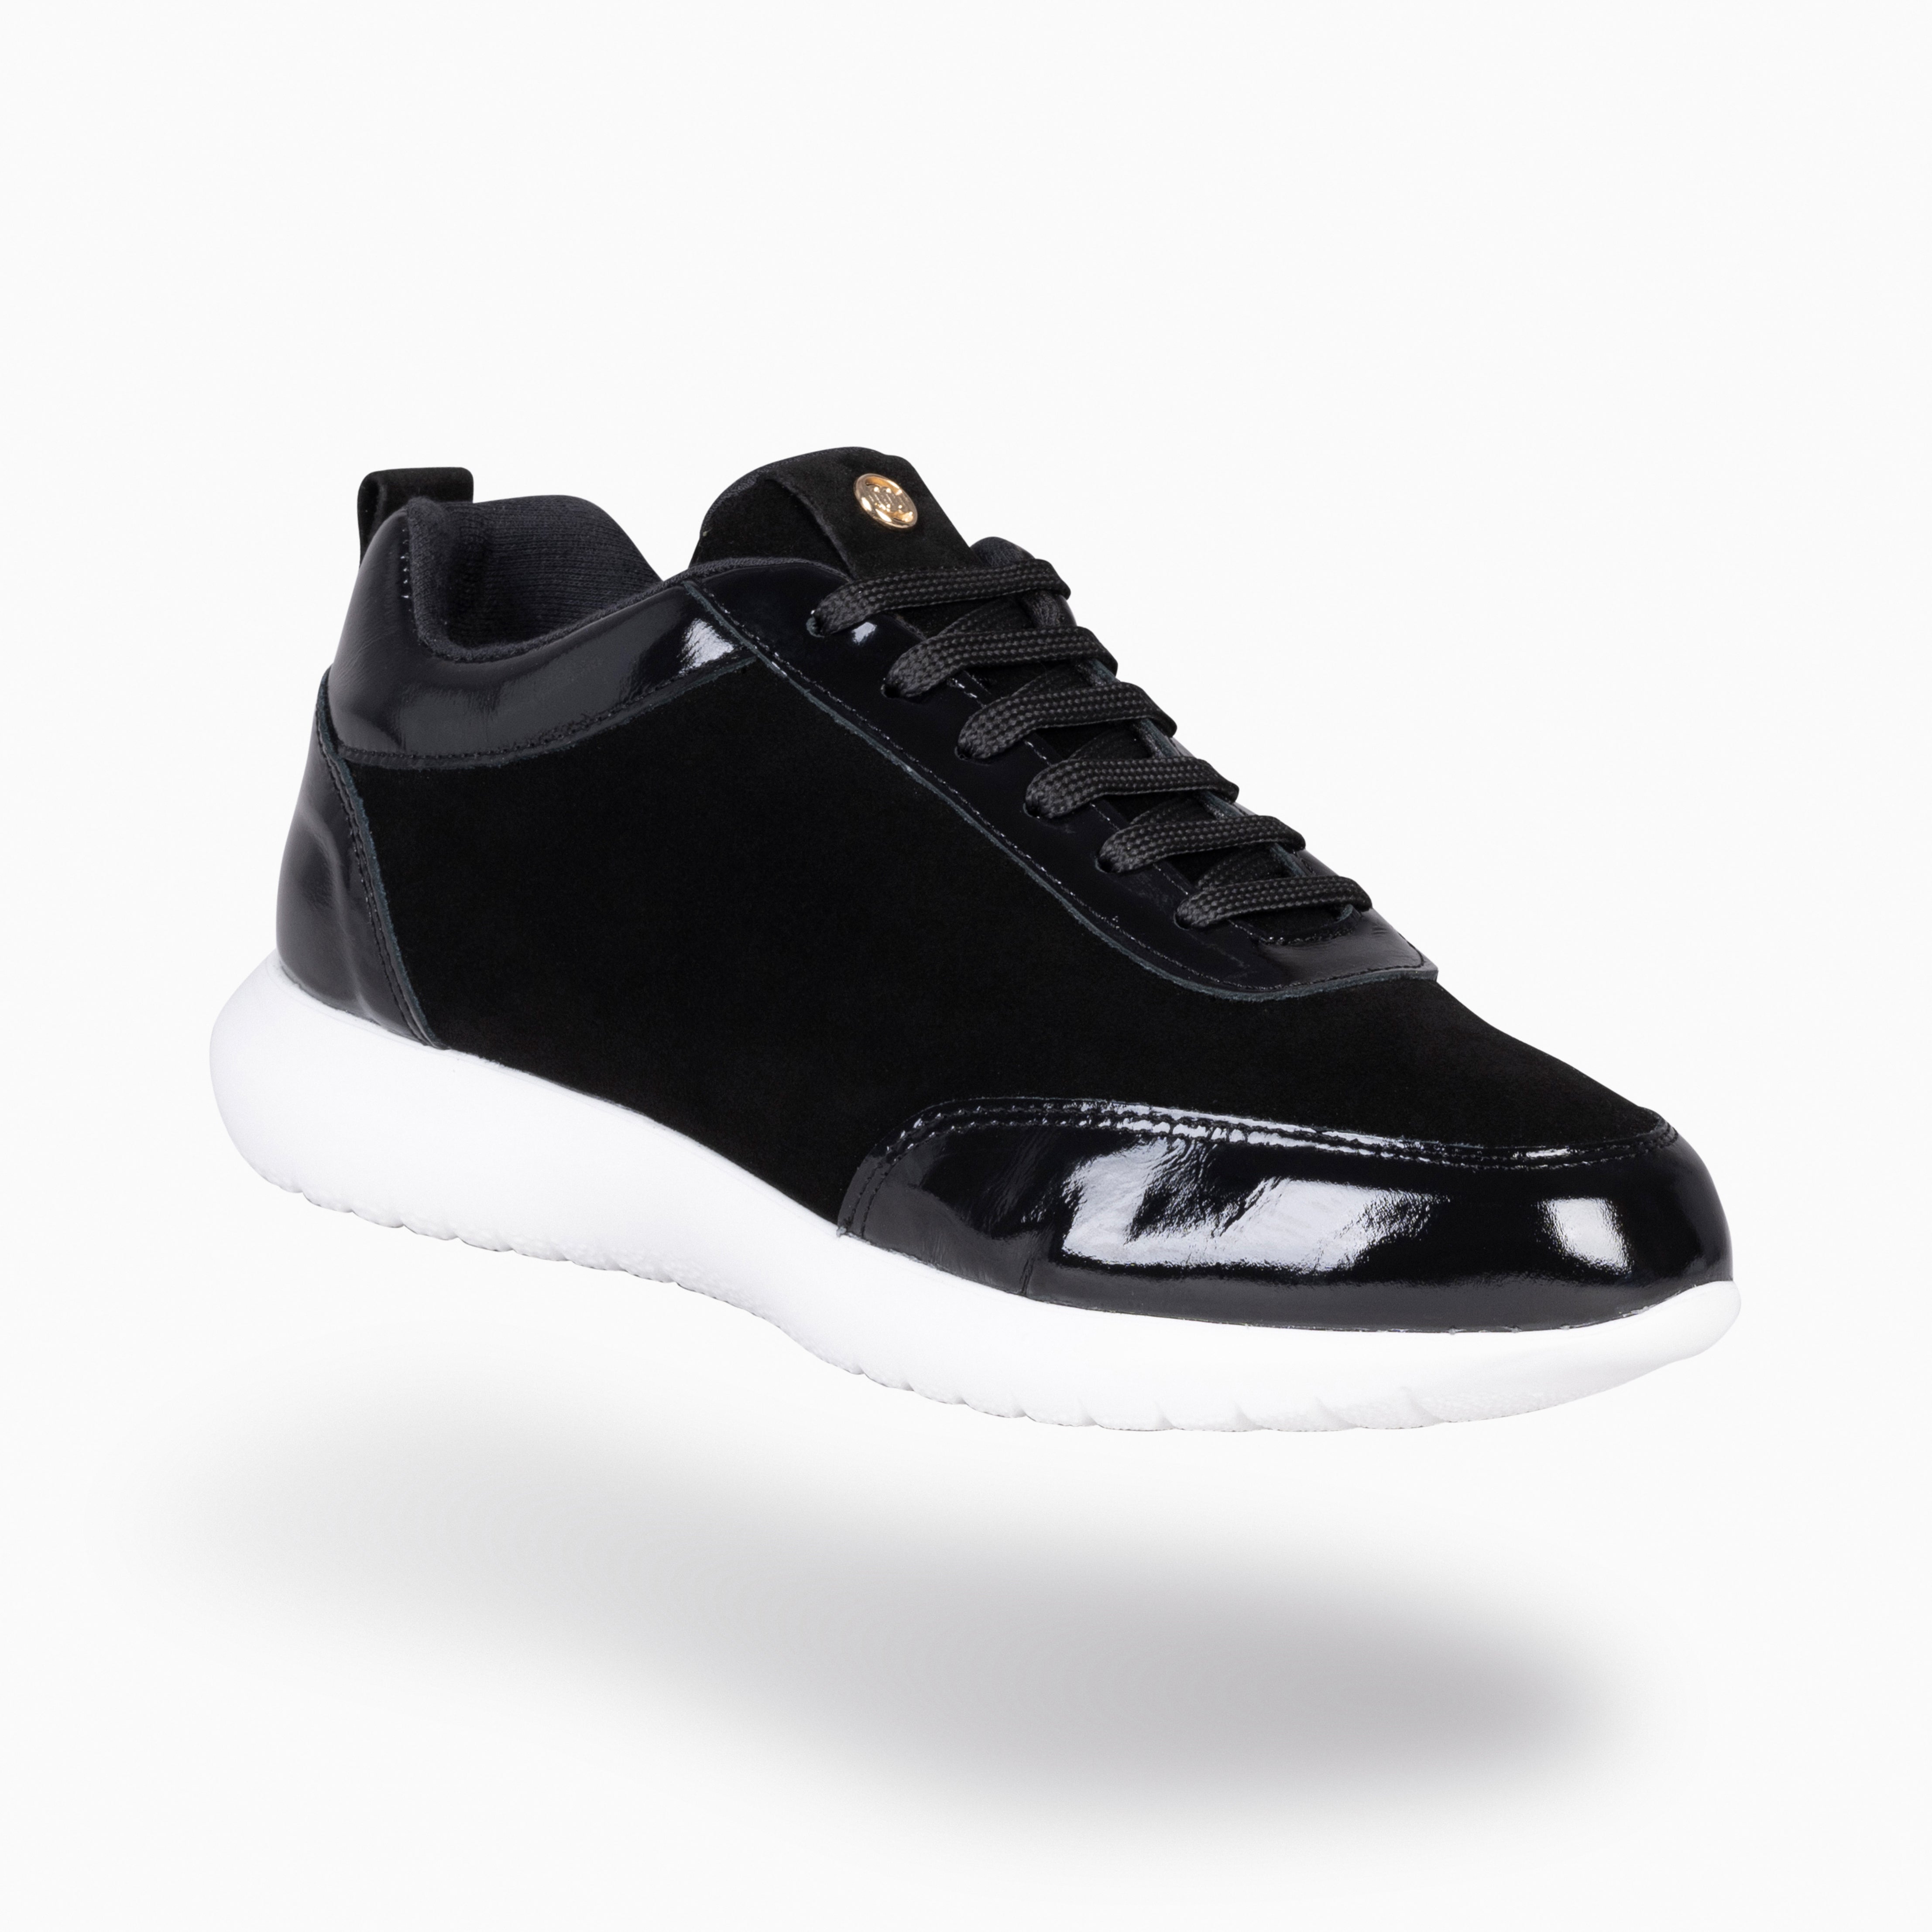 LOIRA - BLACK Sneakers with Patent Leather